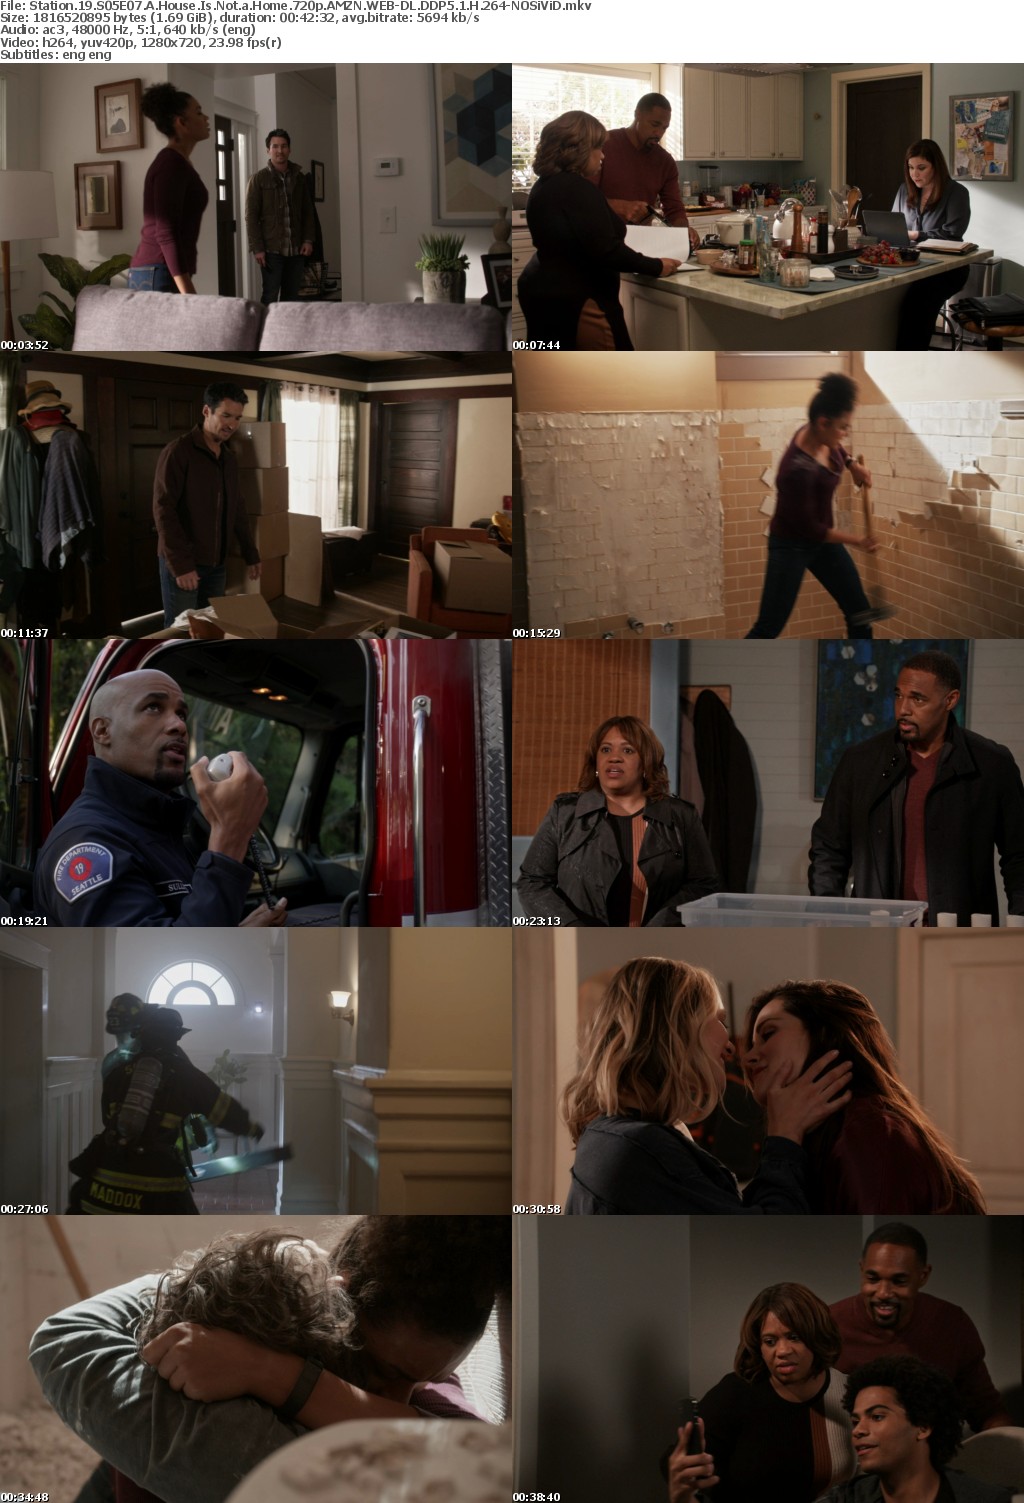 Station 19 S05E07 A House Is Not a Home 720p AMZN WEBRip DDP5 1 x264-NOSiViD